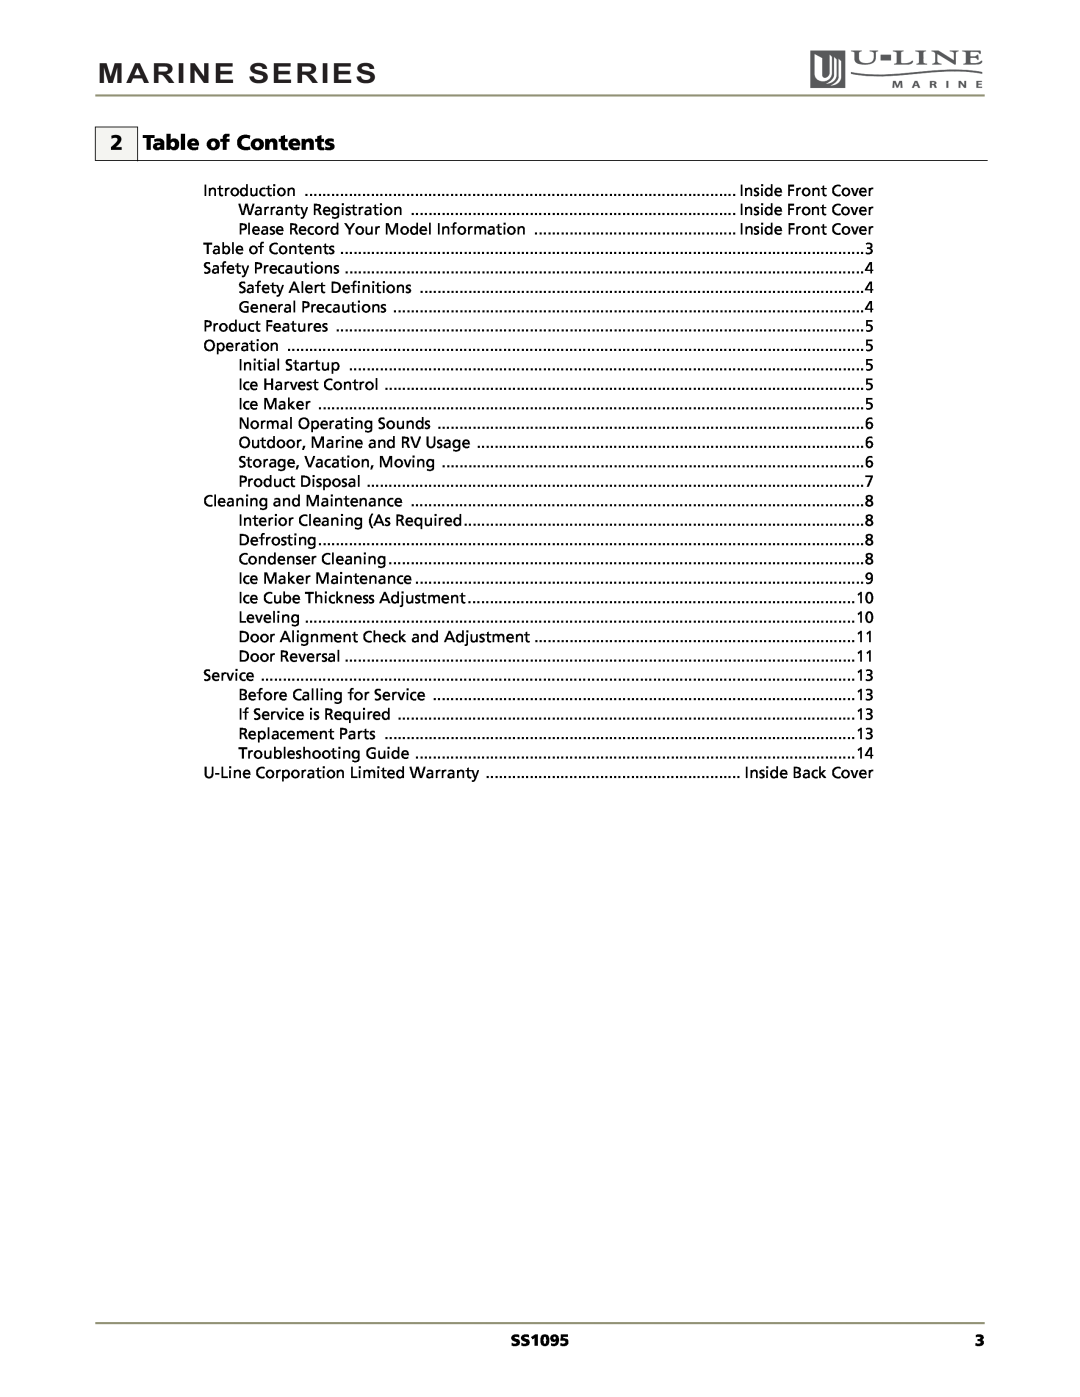 U-Line SS1095 manual Table of Contents, Marine Series 